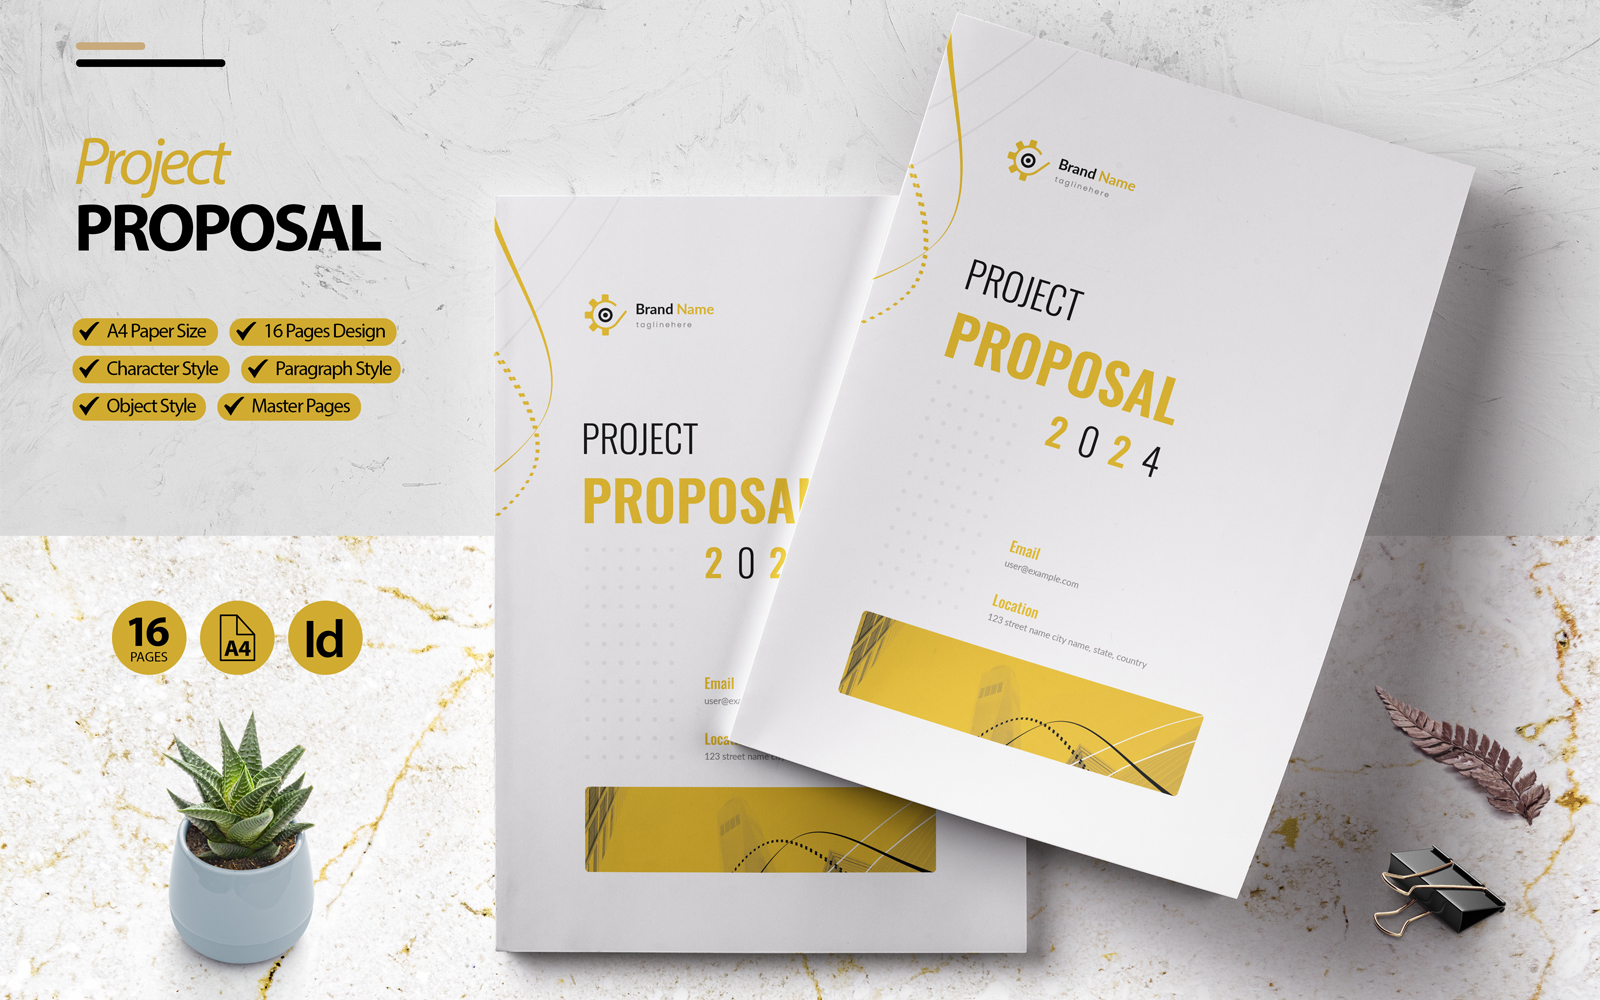 InDesign Project Proposal Template